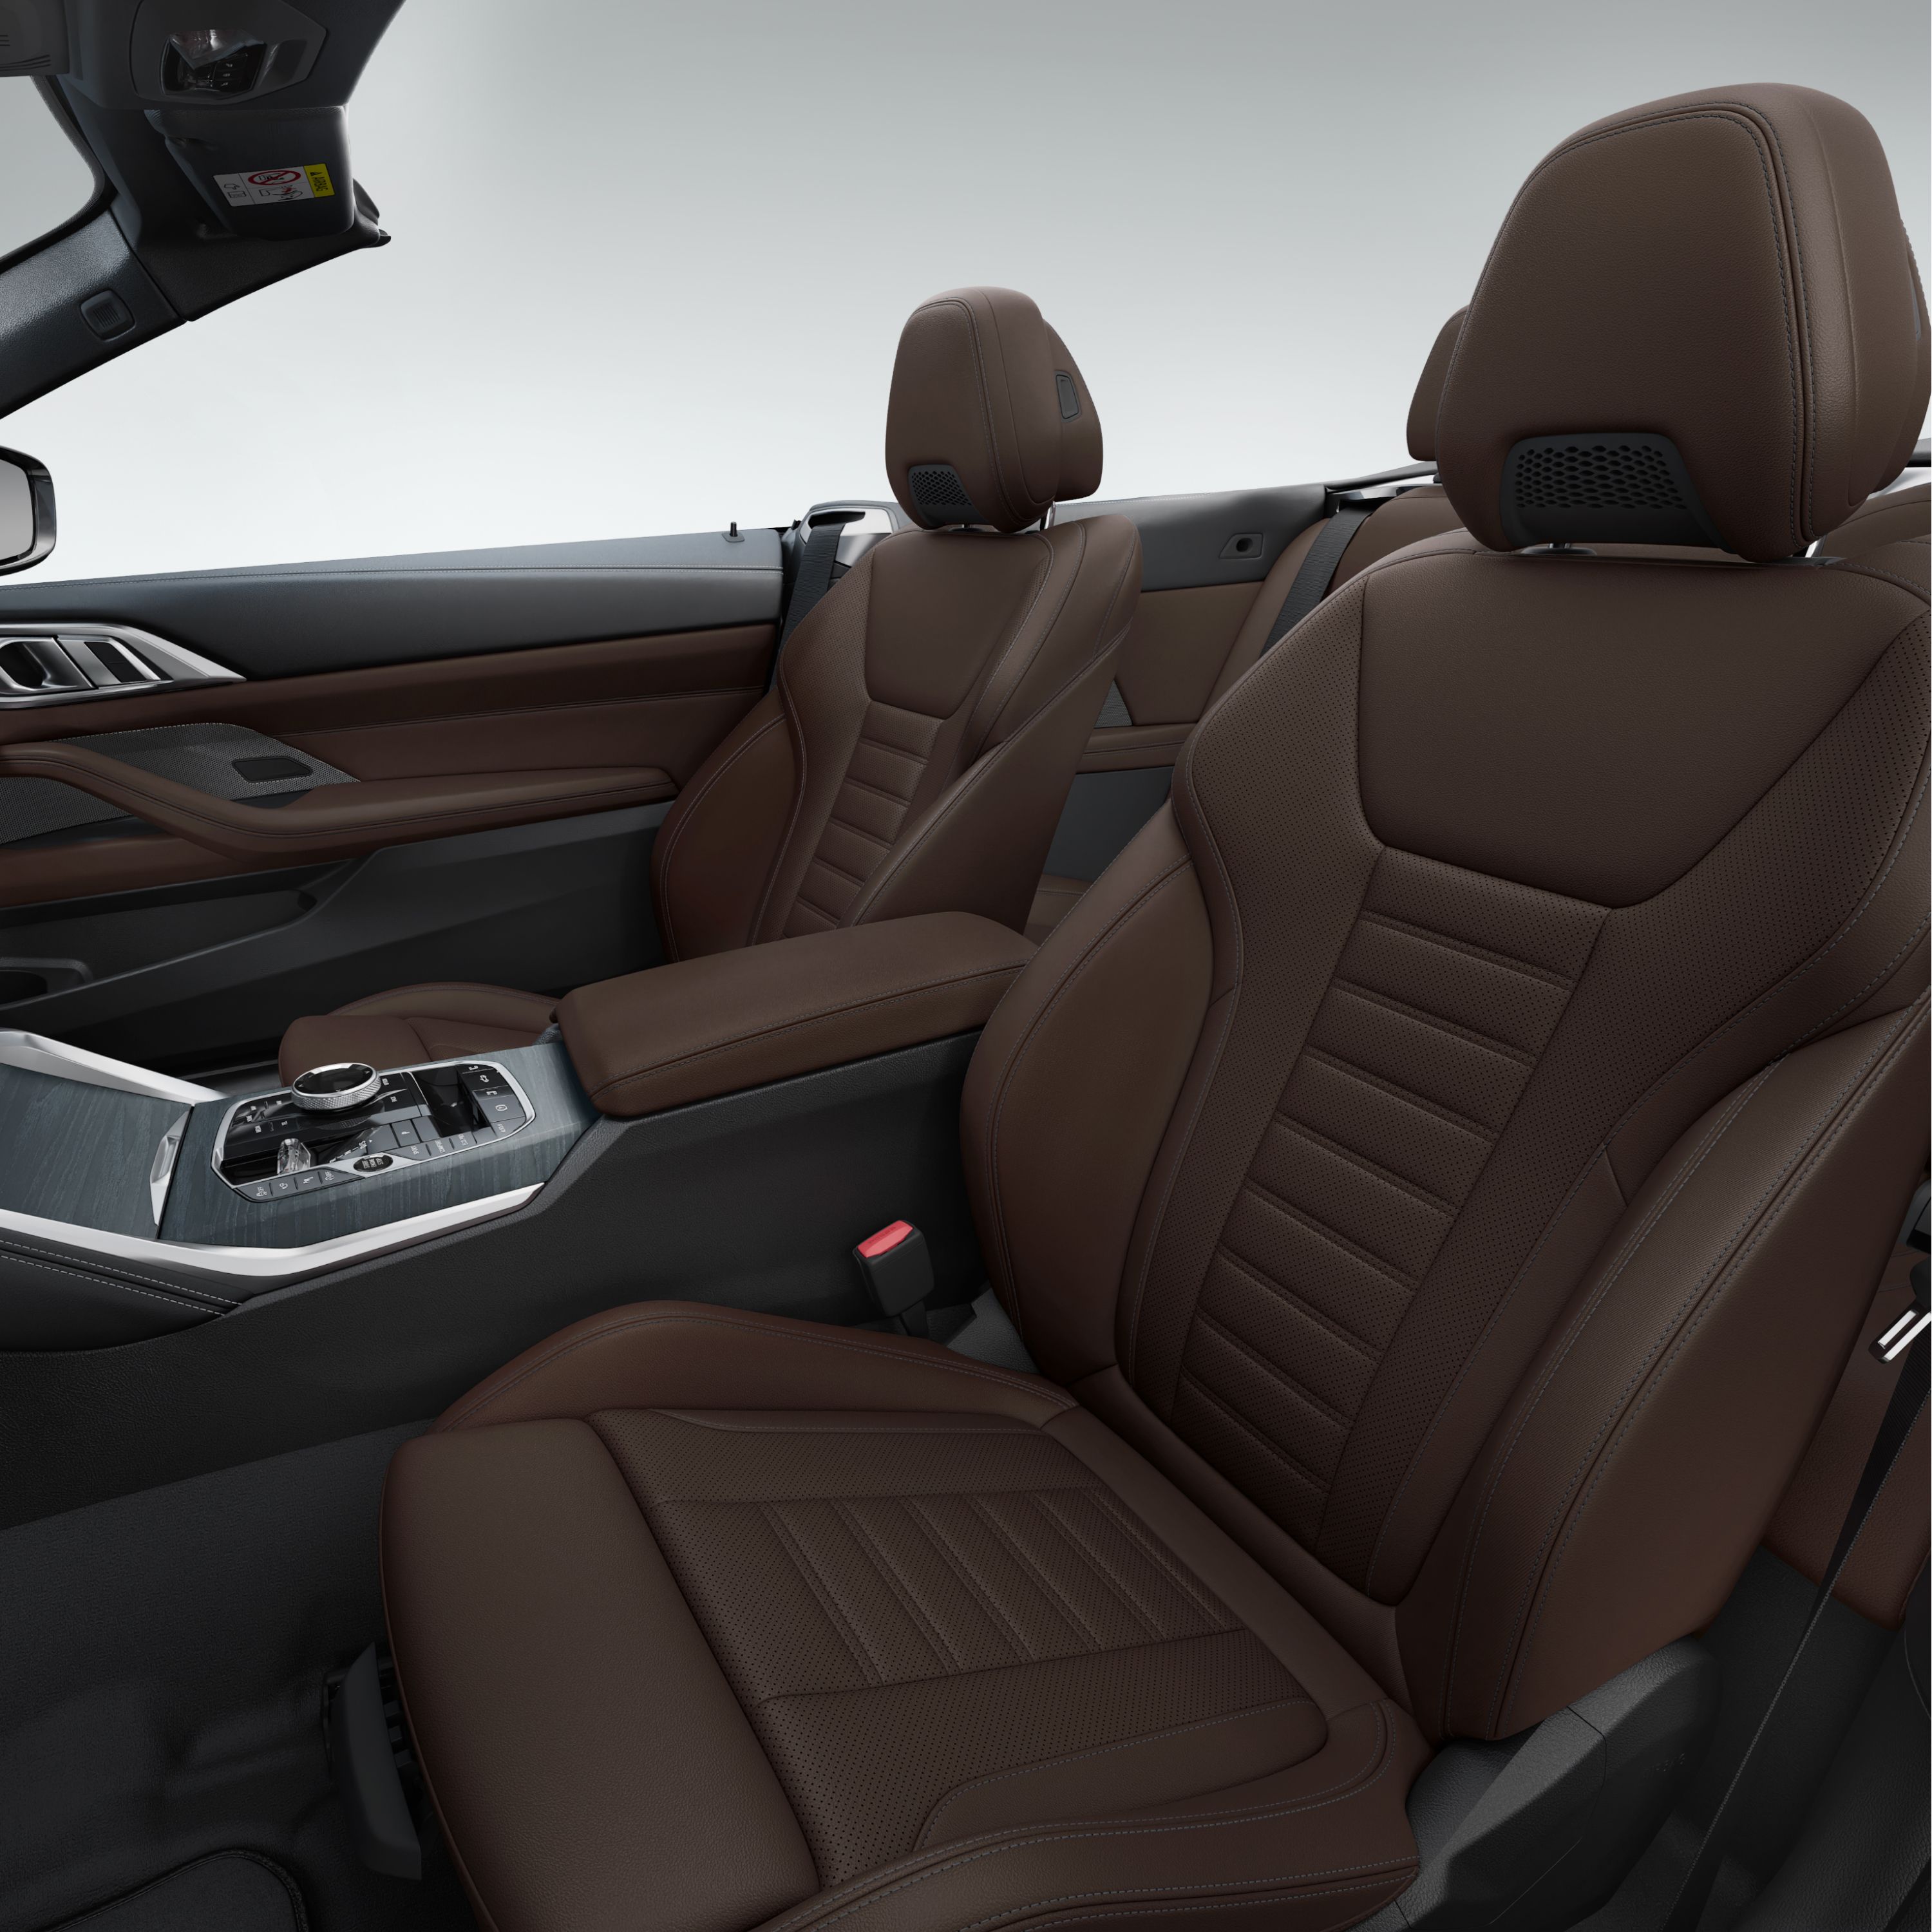 BMW 4 Series Convertible new design of the seat covers